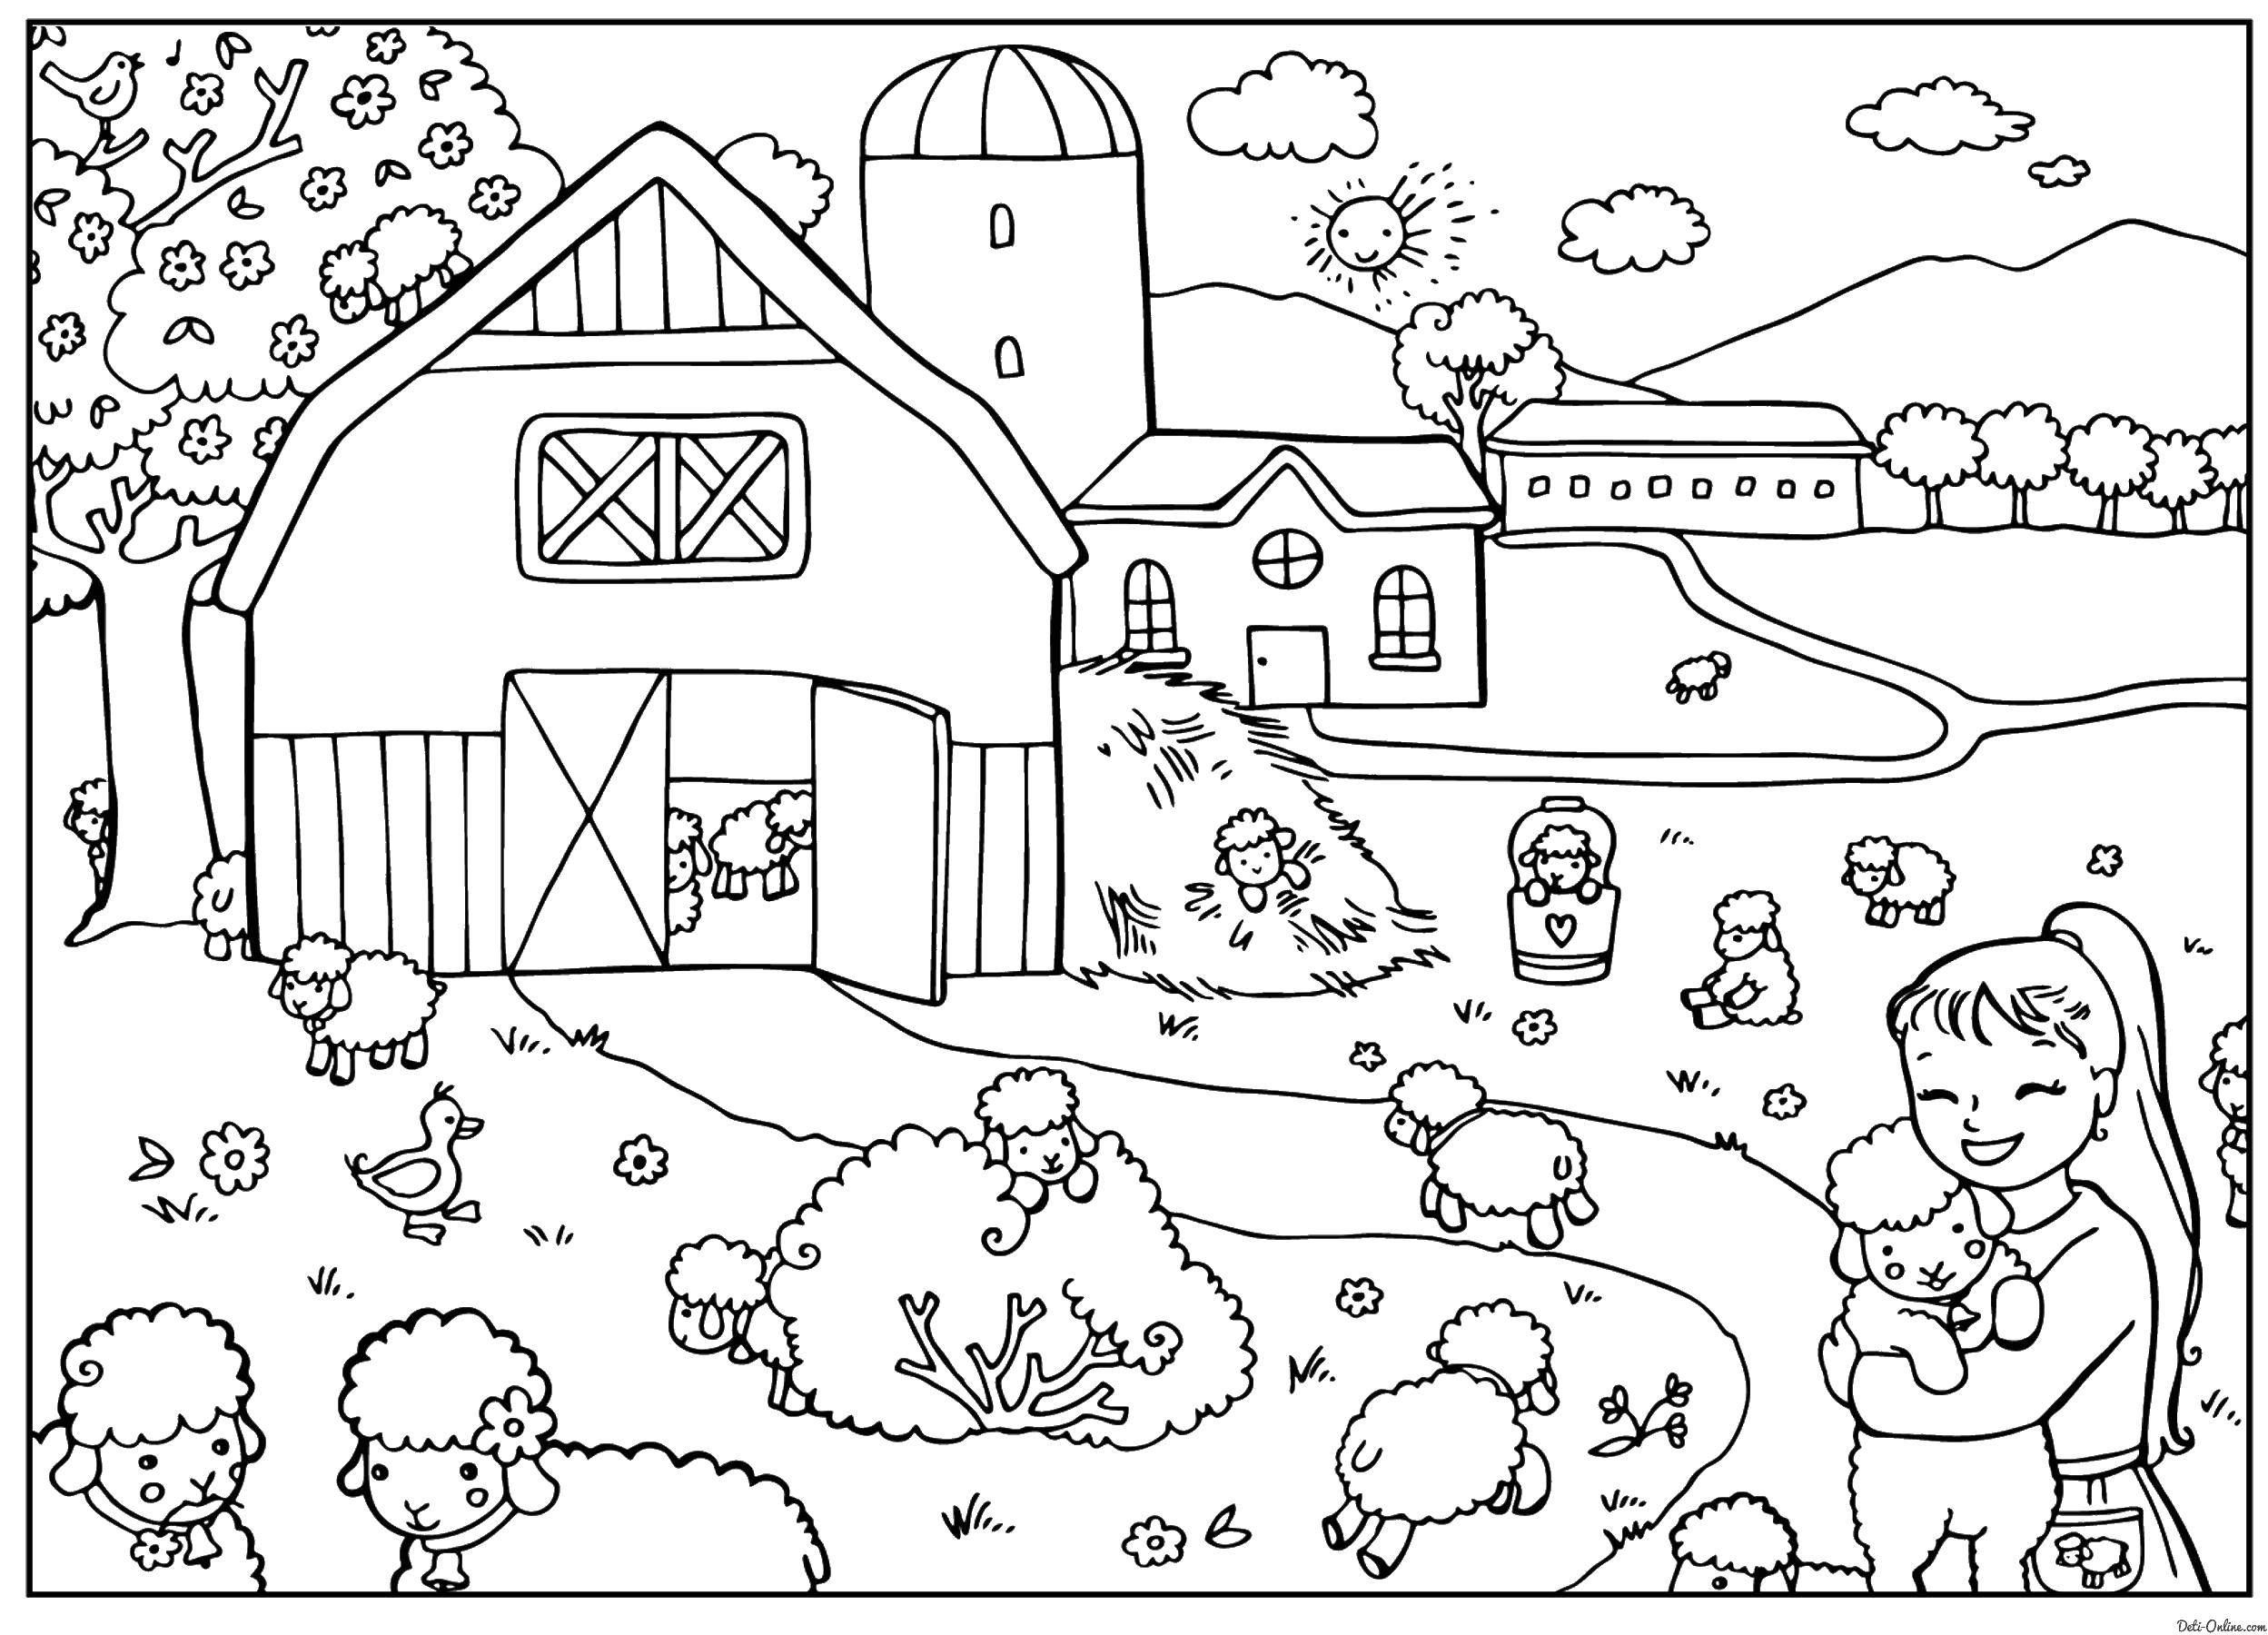 Coloring Farm with sheep. Category People. Tags:  sheep.